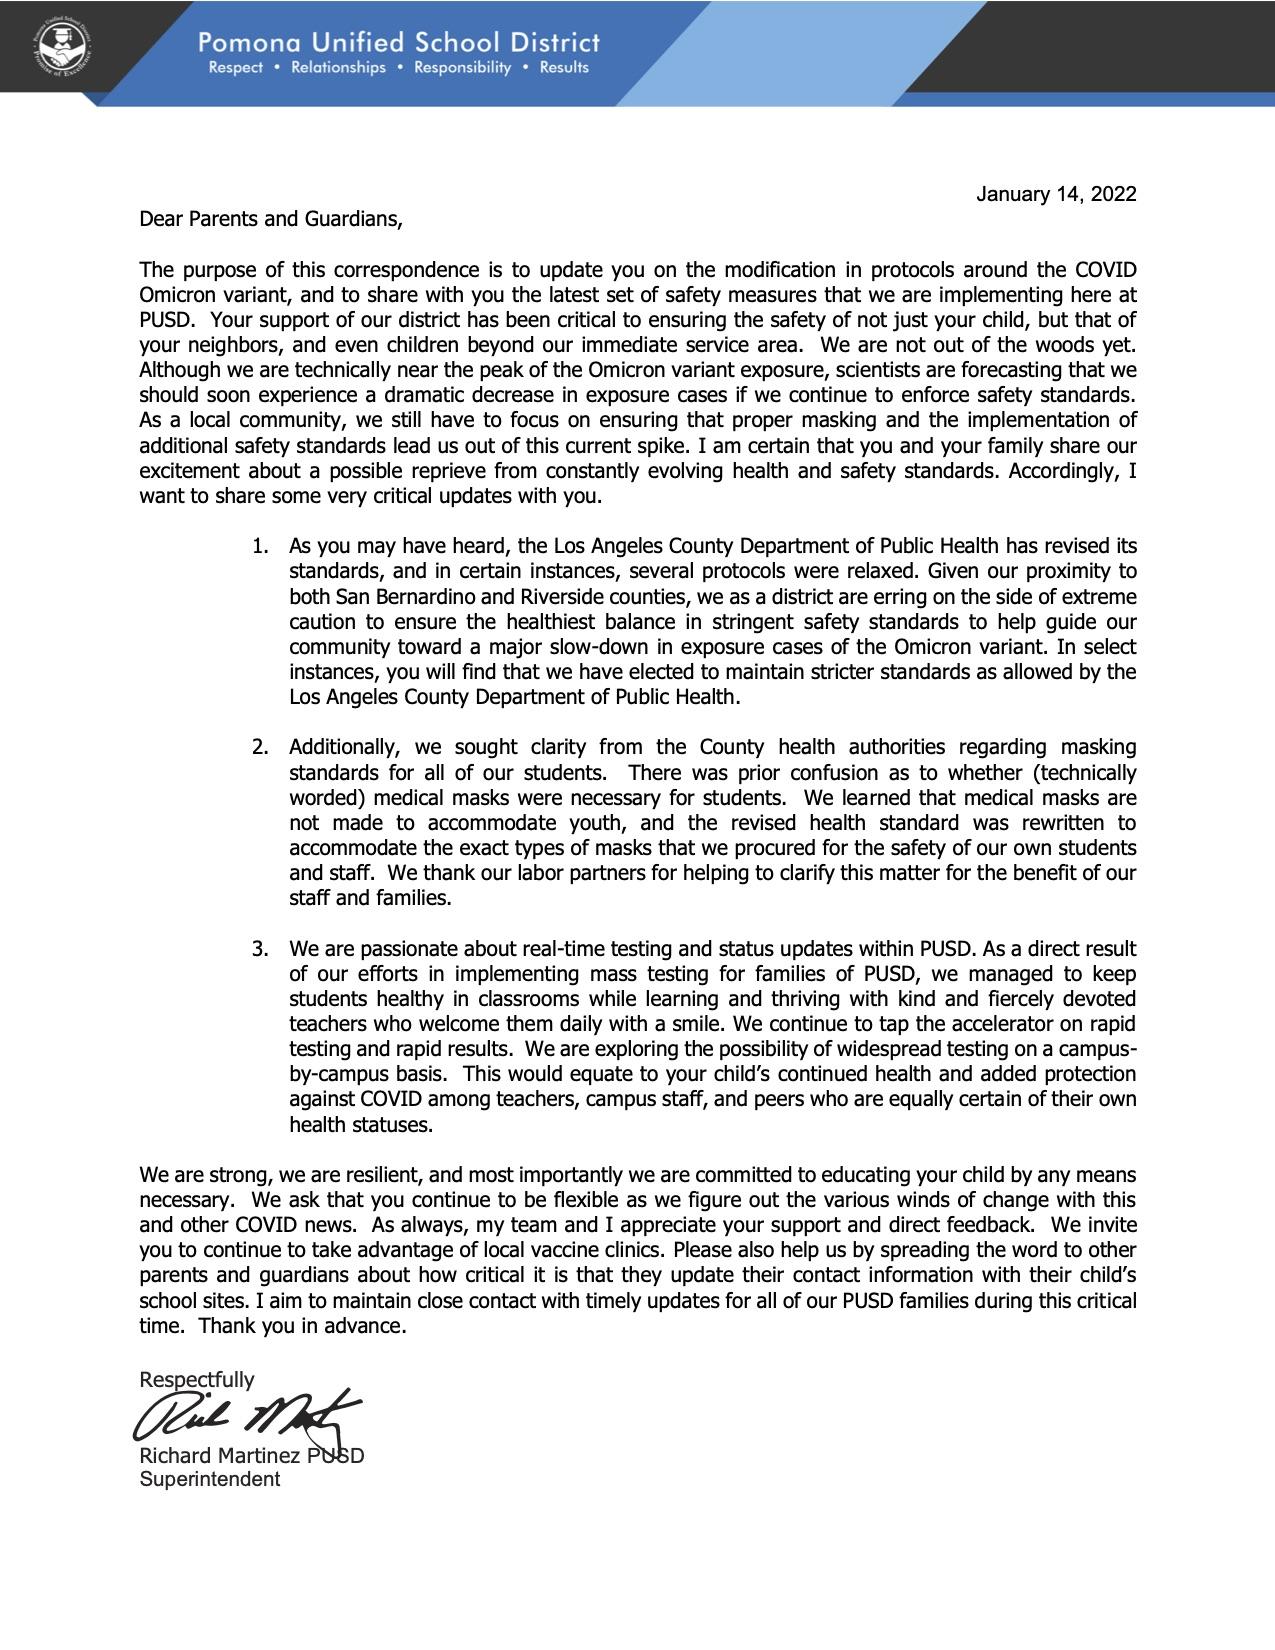 Superintendents Letter to parents 1.14.22